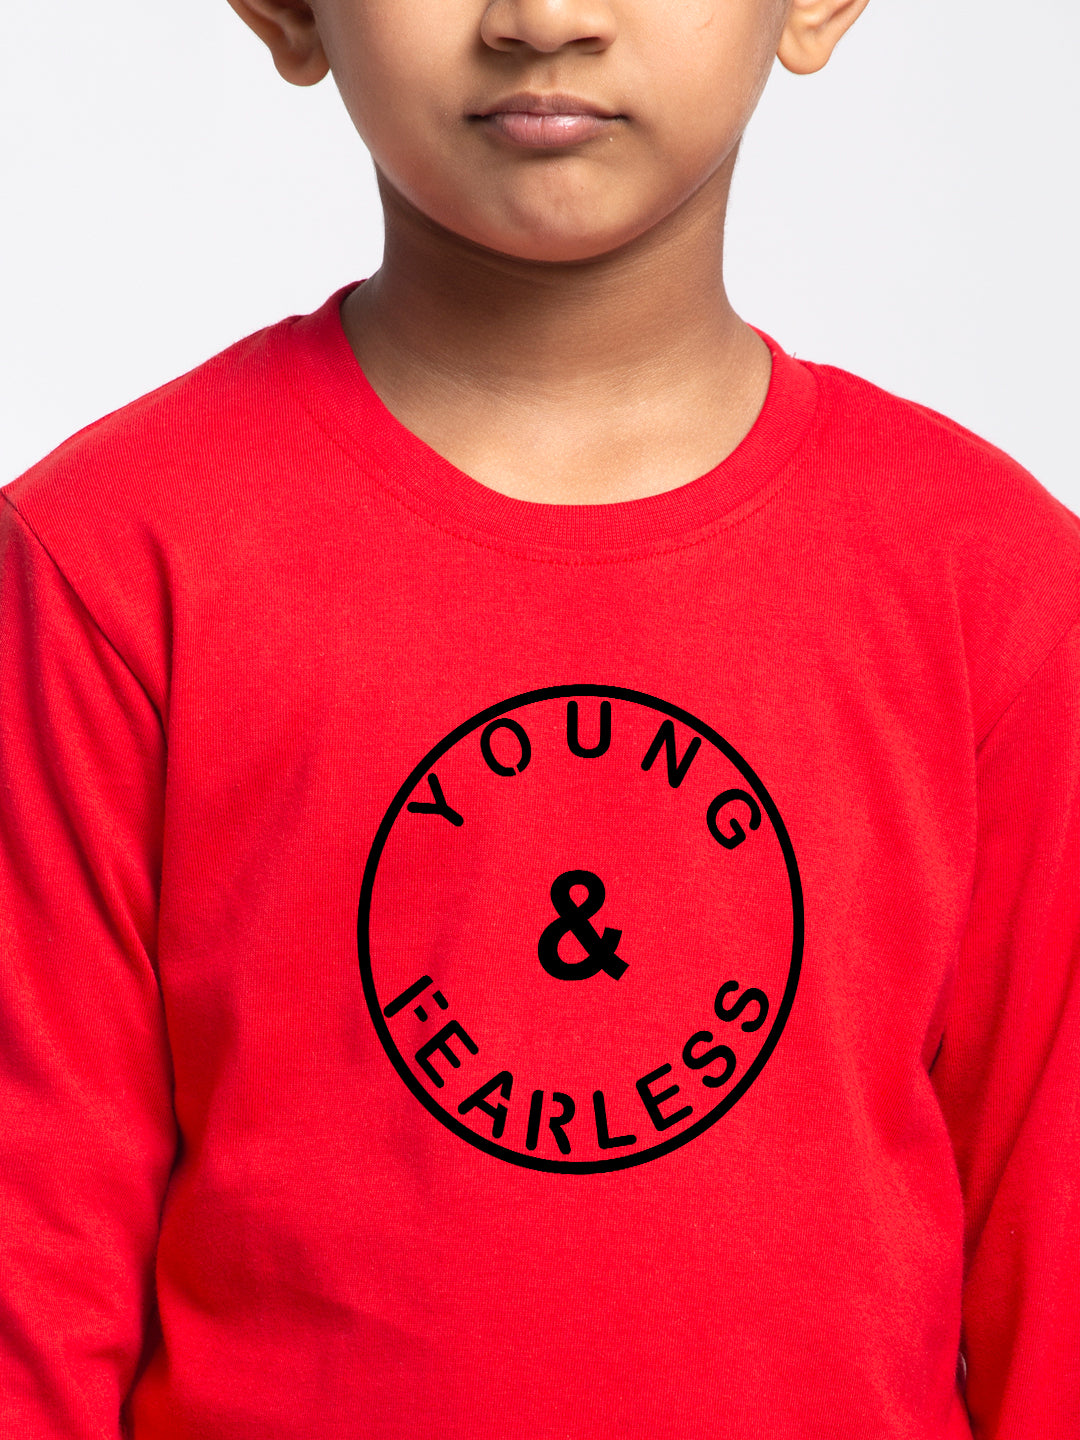 Kids Young Fearless printed full sleeves t-shirt - Friskers